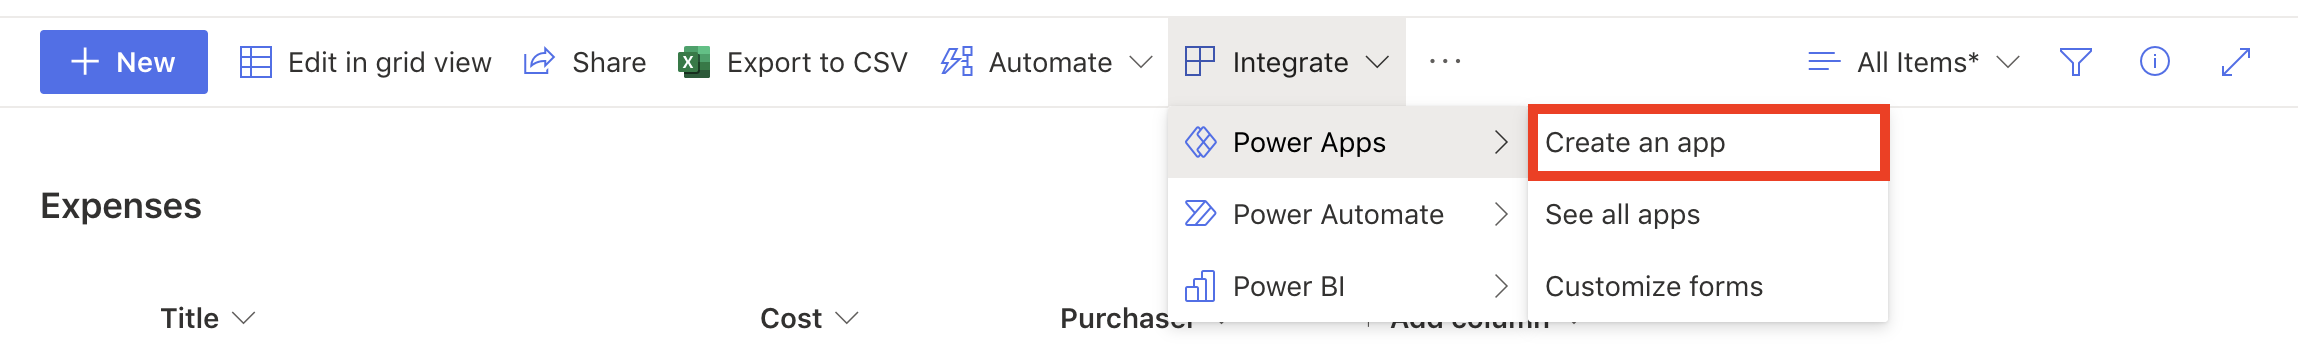 Screenshot of SharePoint toolbar with the PowerApps menu expanded and the Create an app option highlighted.